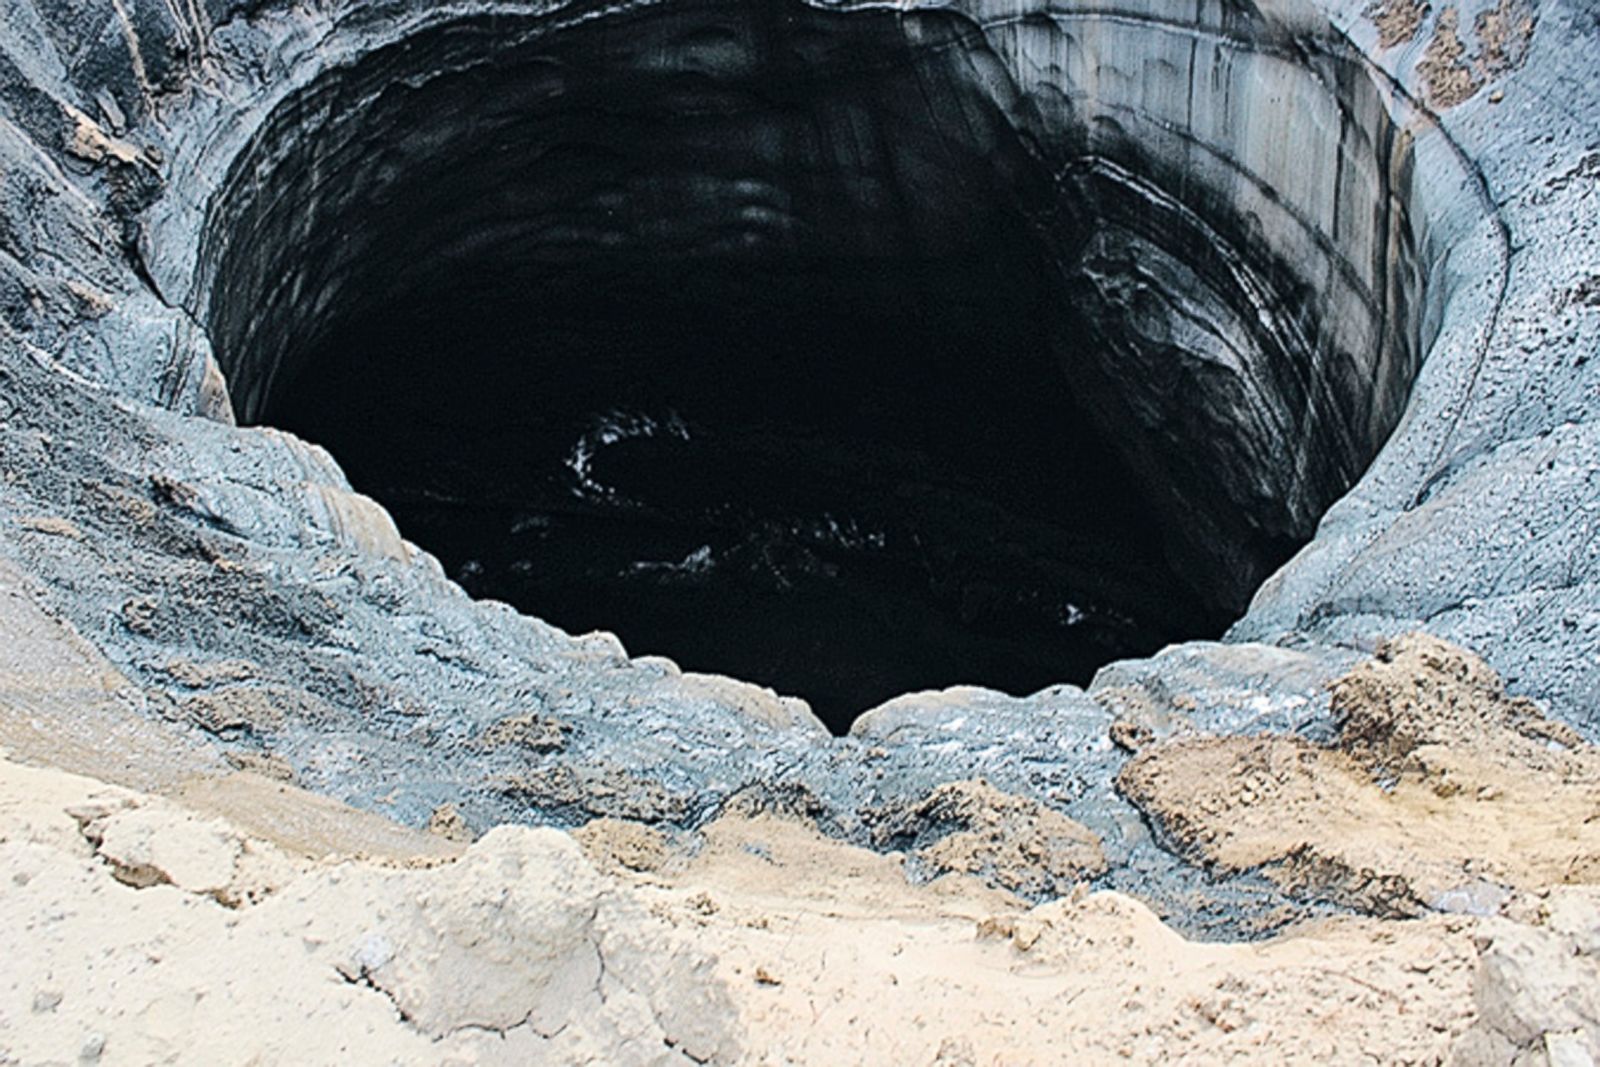 biggest sinkhole in the world